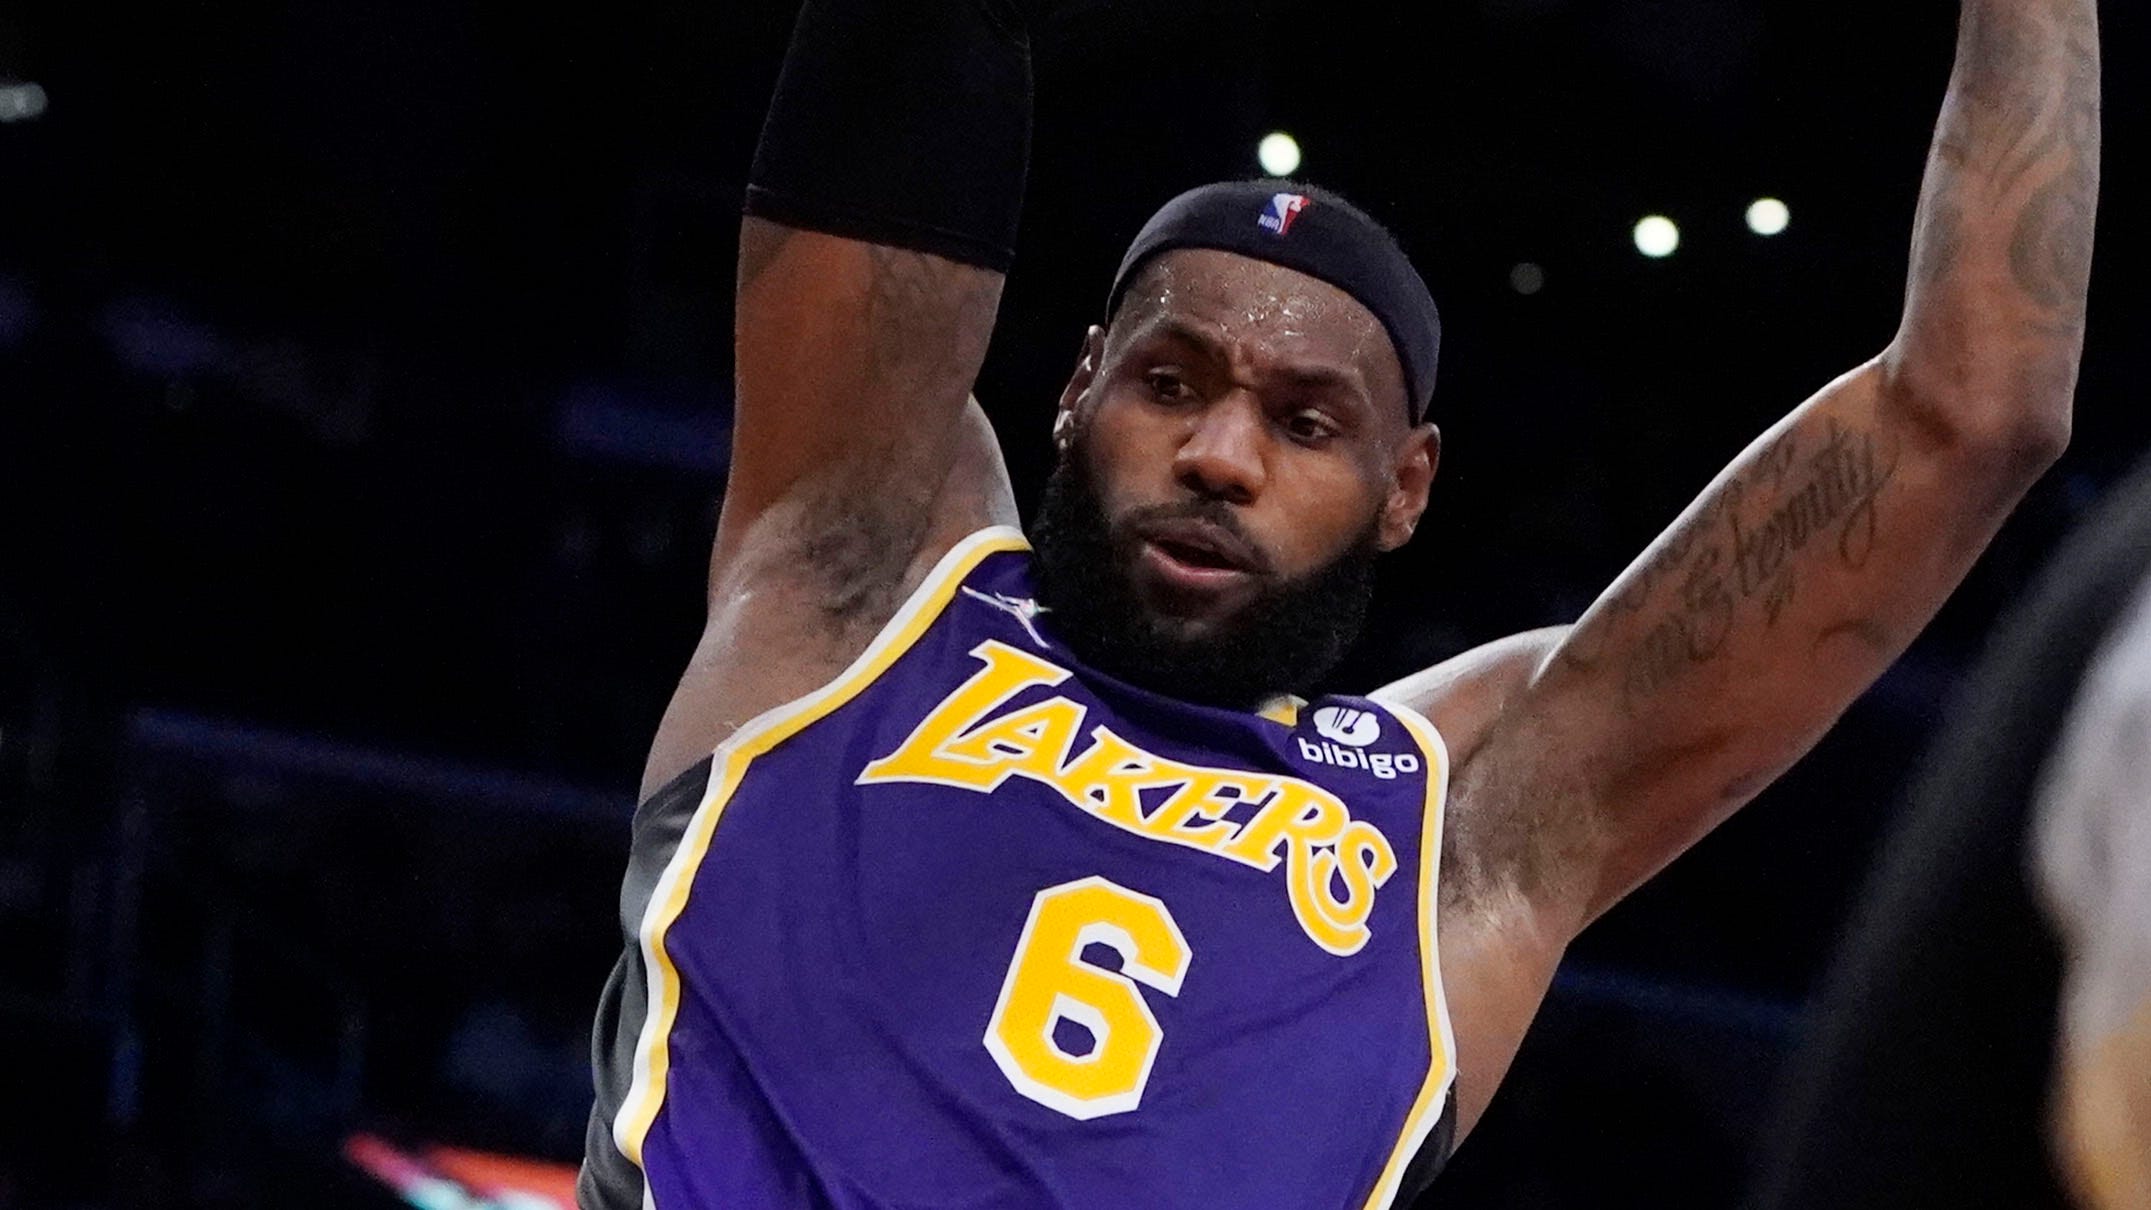 LeBron James chirps Suns’ Cam Payne from the bench during Lakers’ loss: ‘Stay humble’ – Fox News